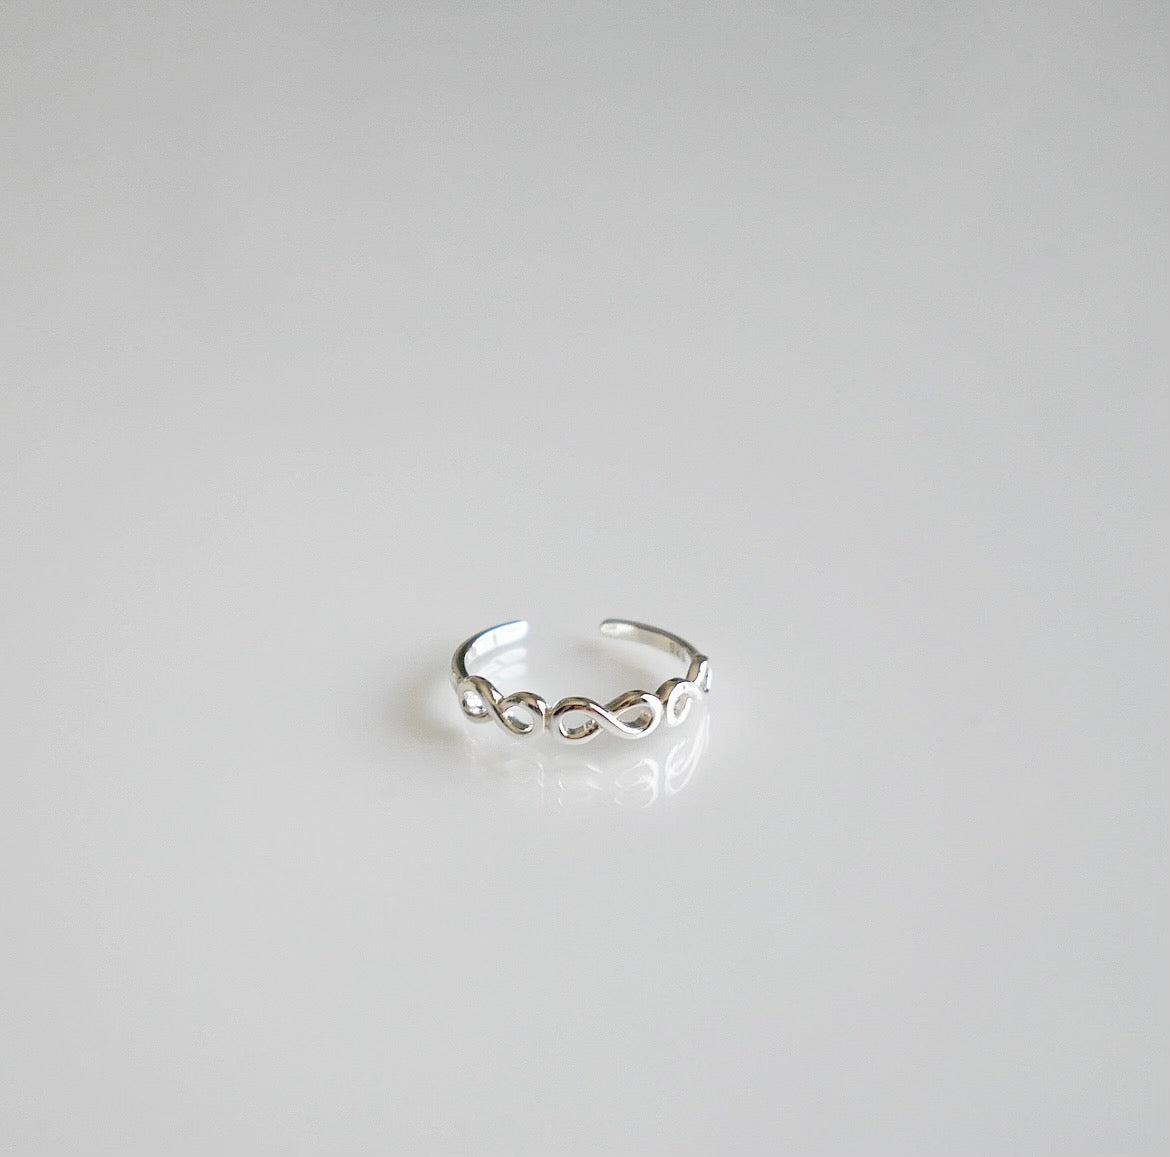 Triple Infinity Adjustable Toe Ring/Middy Ring .925 sterling silver